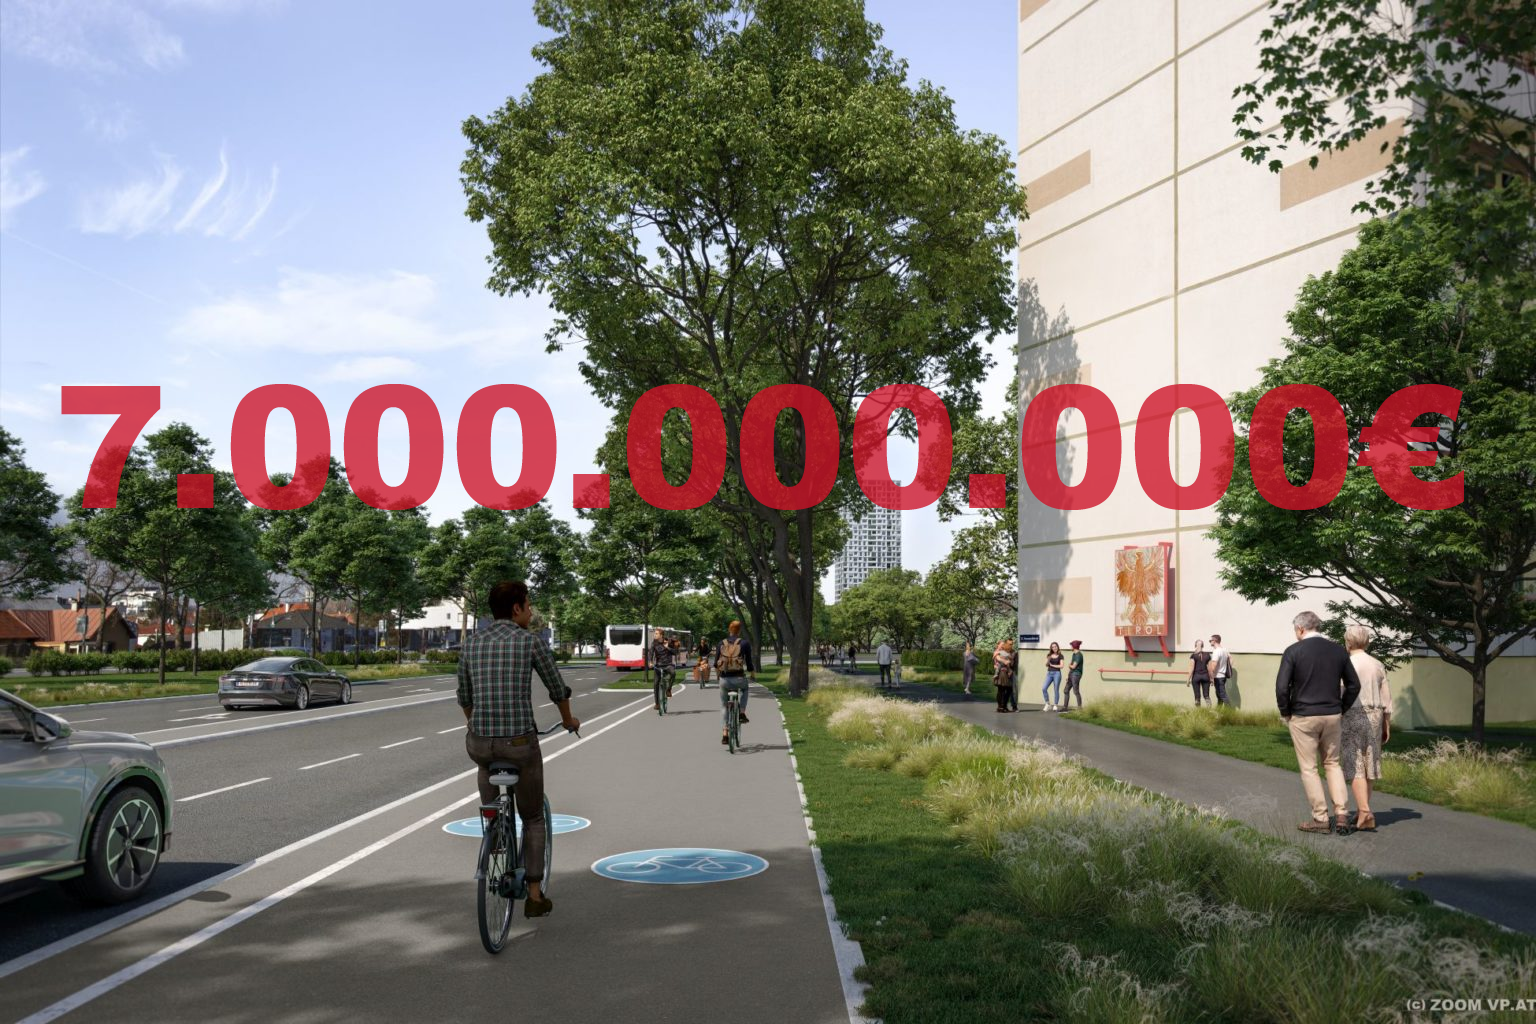 Future-oriented Study: Austria’s cycle infrastructure needs 7 Billion Euros of investment.